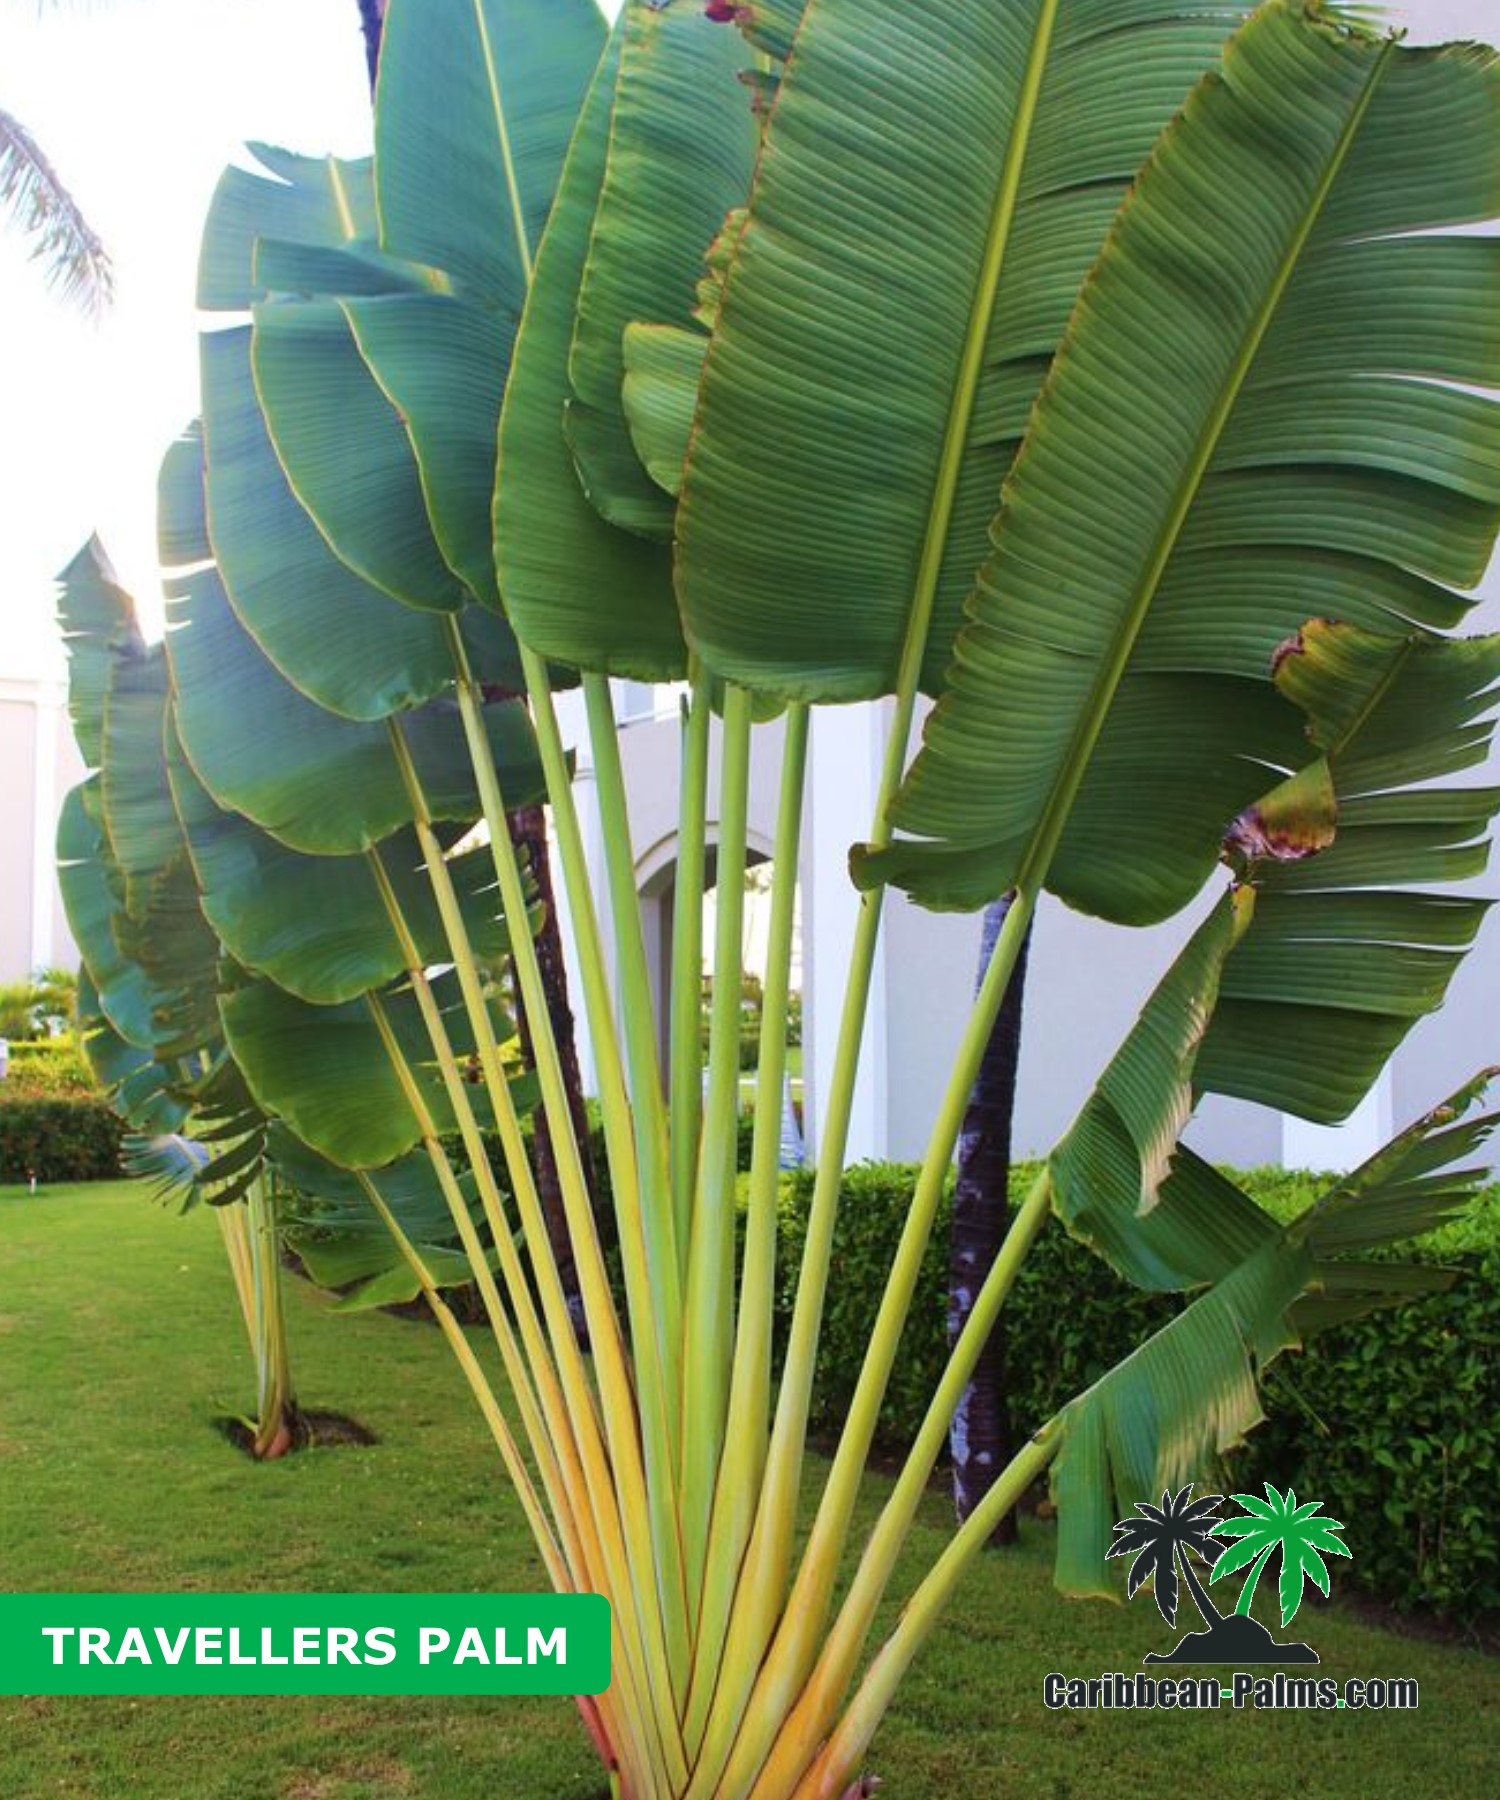 TRAVELLERS PALM